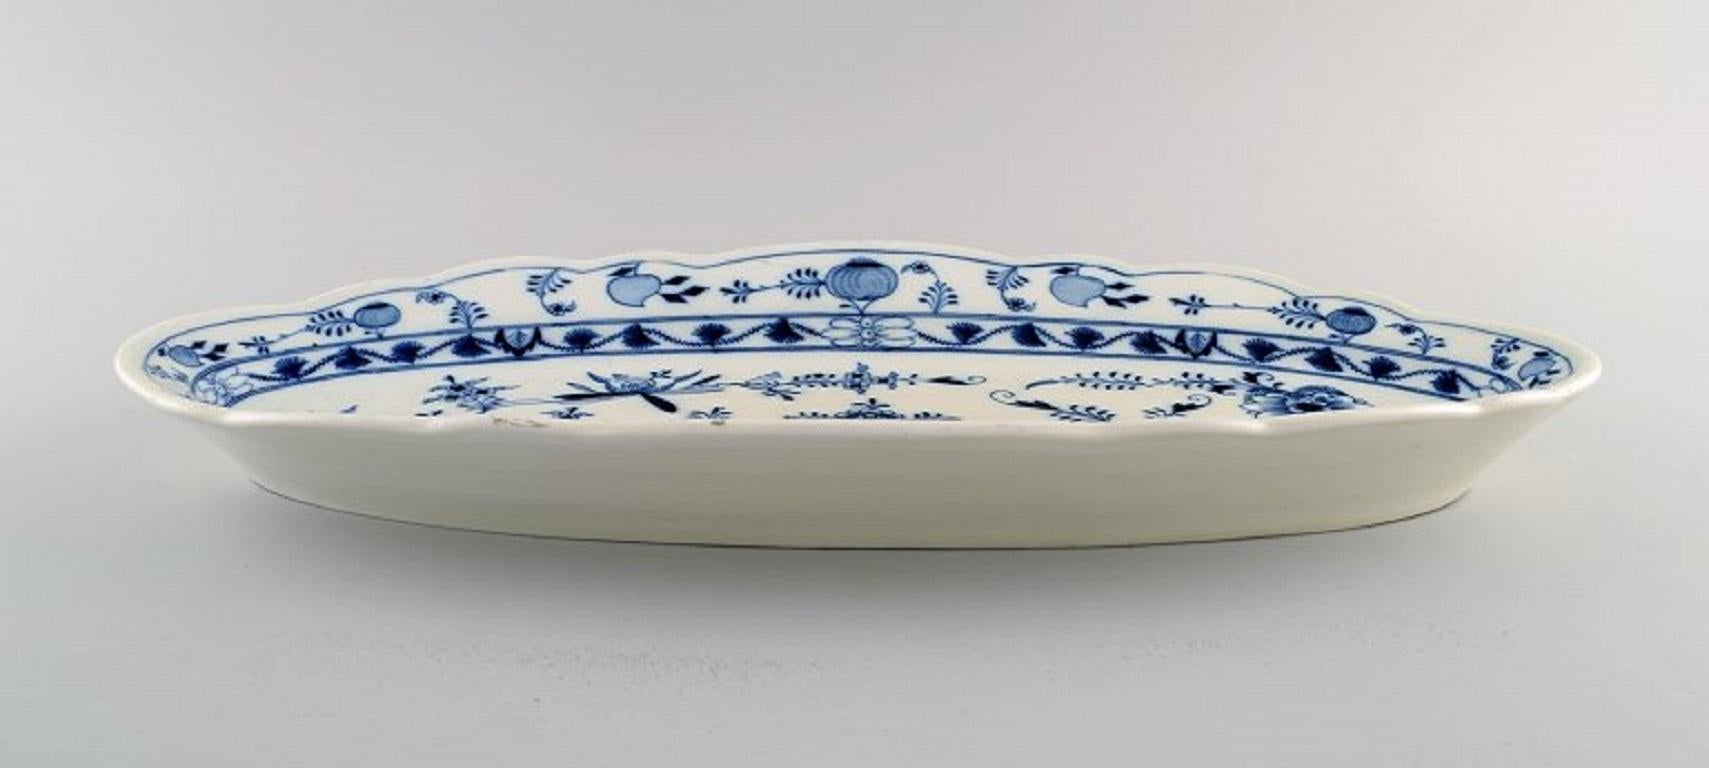 20th Century Large Stadt Meissen Blue Onion Fish Dish in Hand-Painted Porcelain